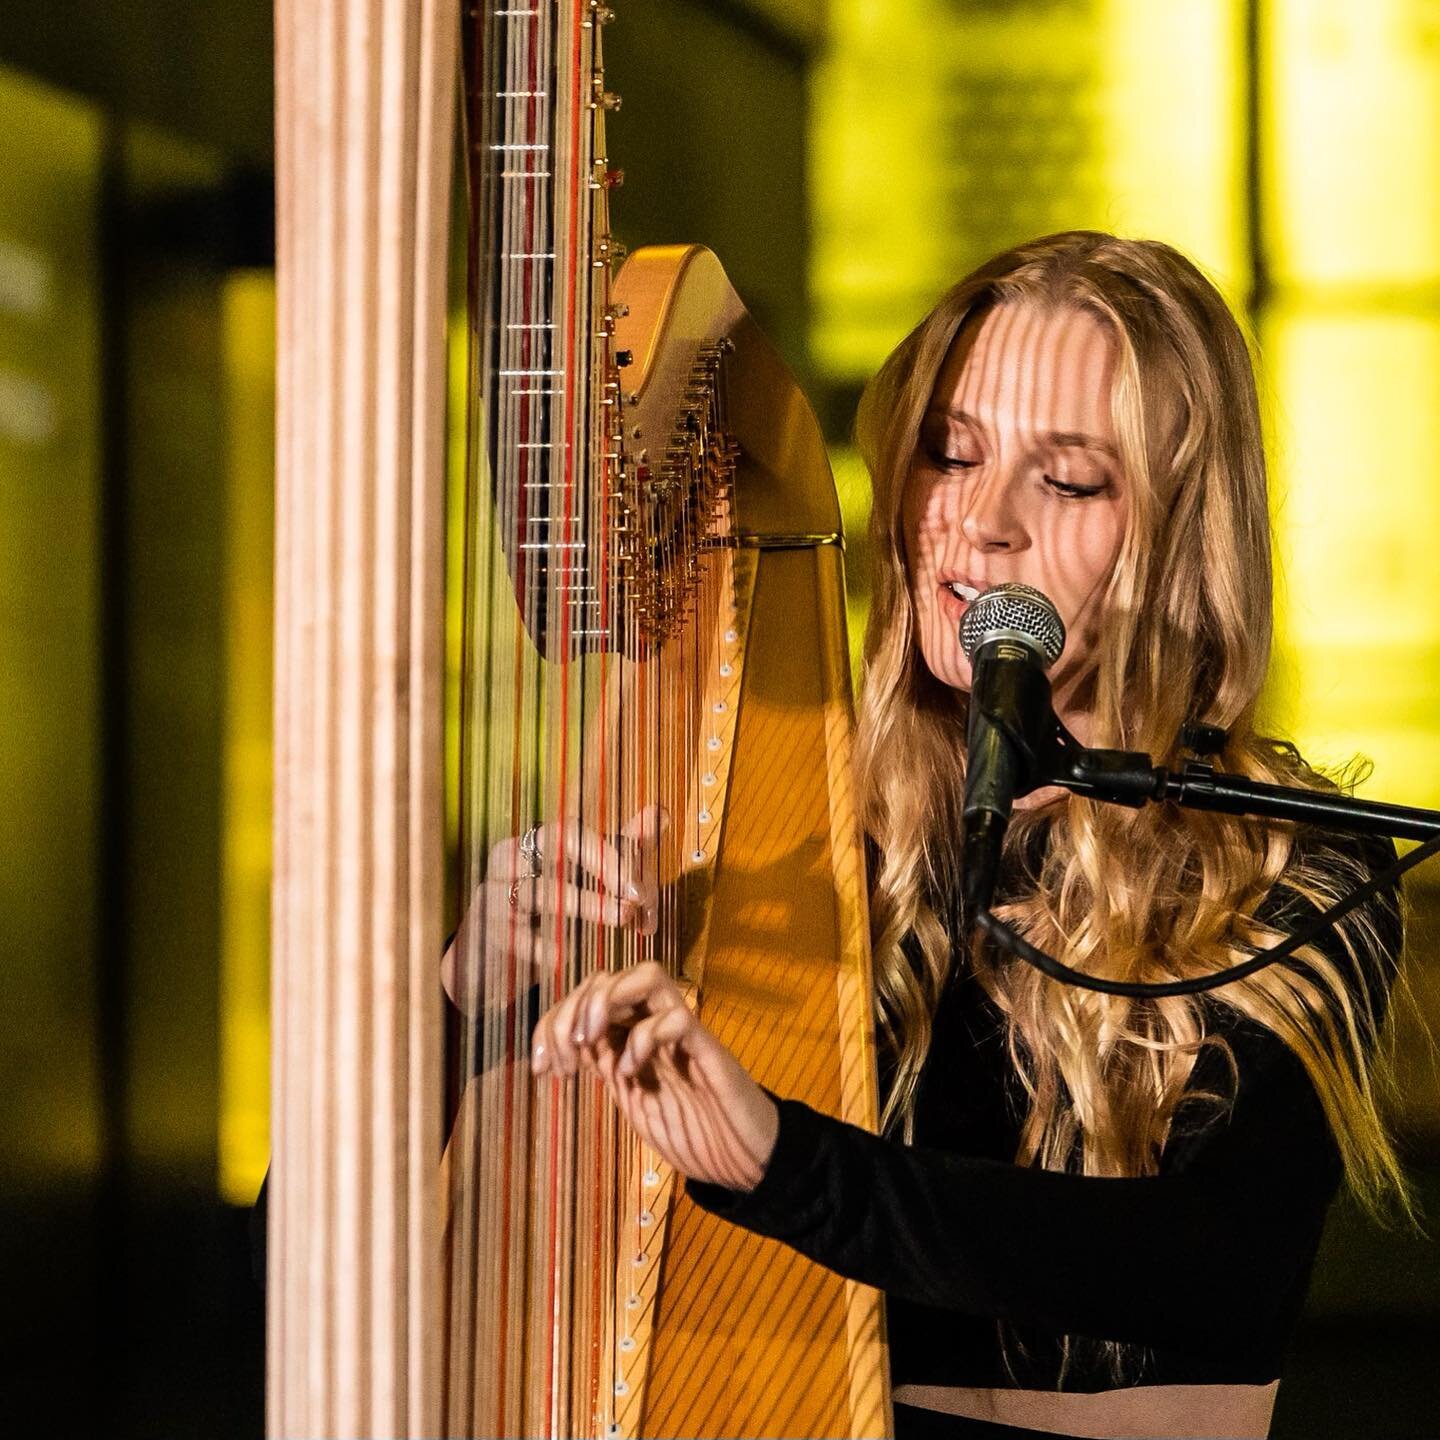 At each stop of our Mass Meditation &amp; Breathwork tour we experienced a special weaving of live string 🎻 performances, led by the other worldly @lexie_harp_ 👼 

Lexie was our resident musician for the tour, &amp; worked with local musicians in e